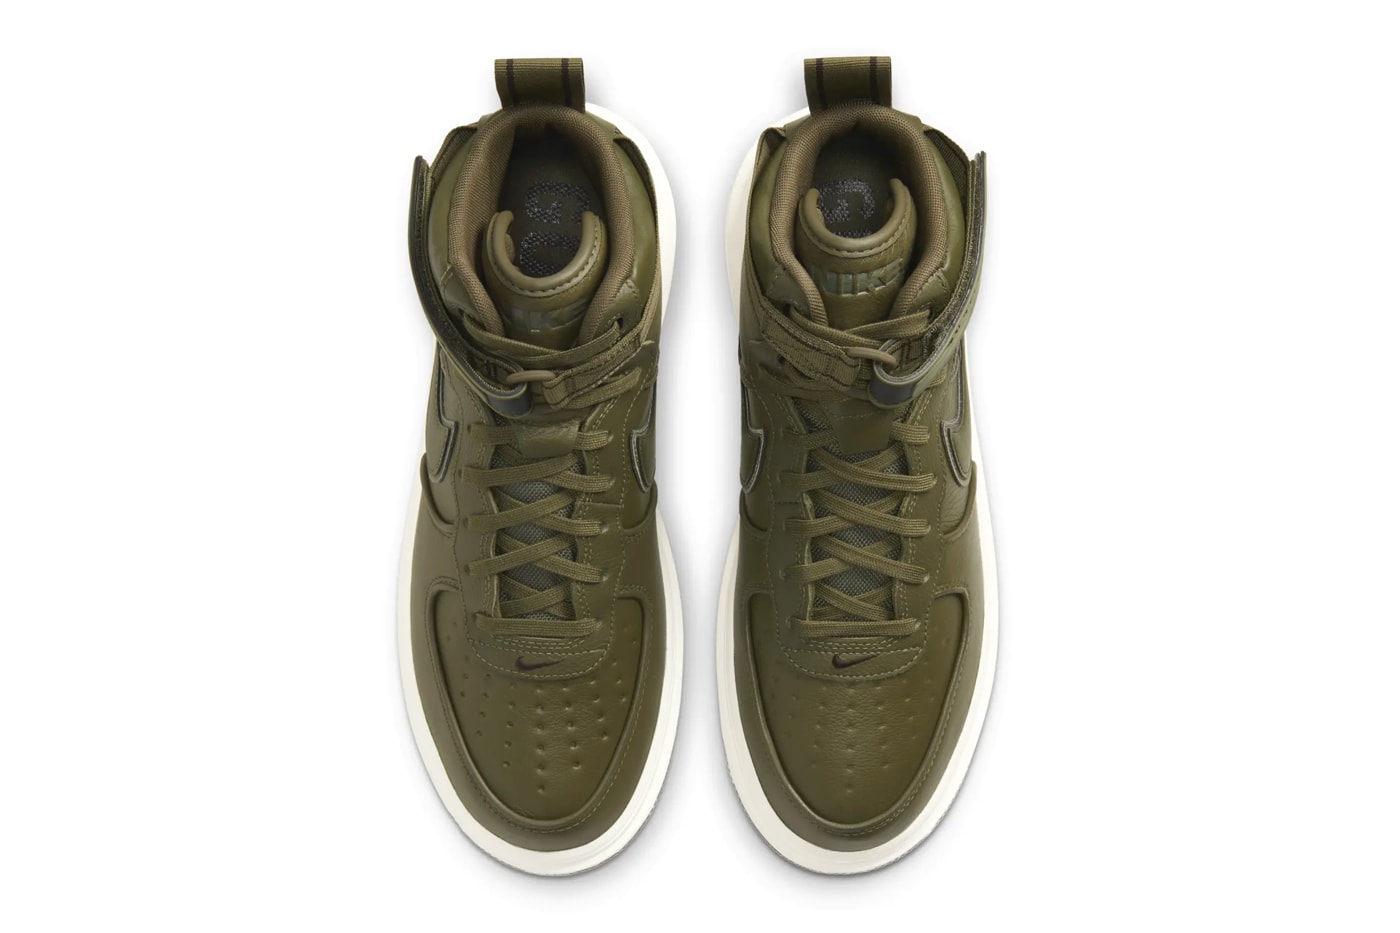 Nike Air Force 1 Boot GORE-TEX 全新配色「Wheat」和「Olive」